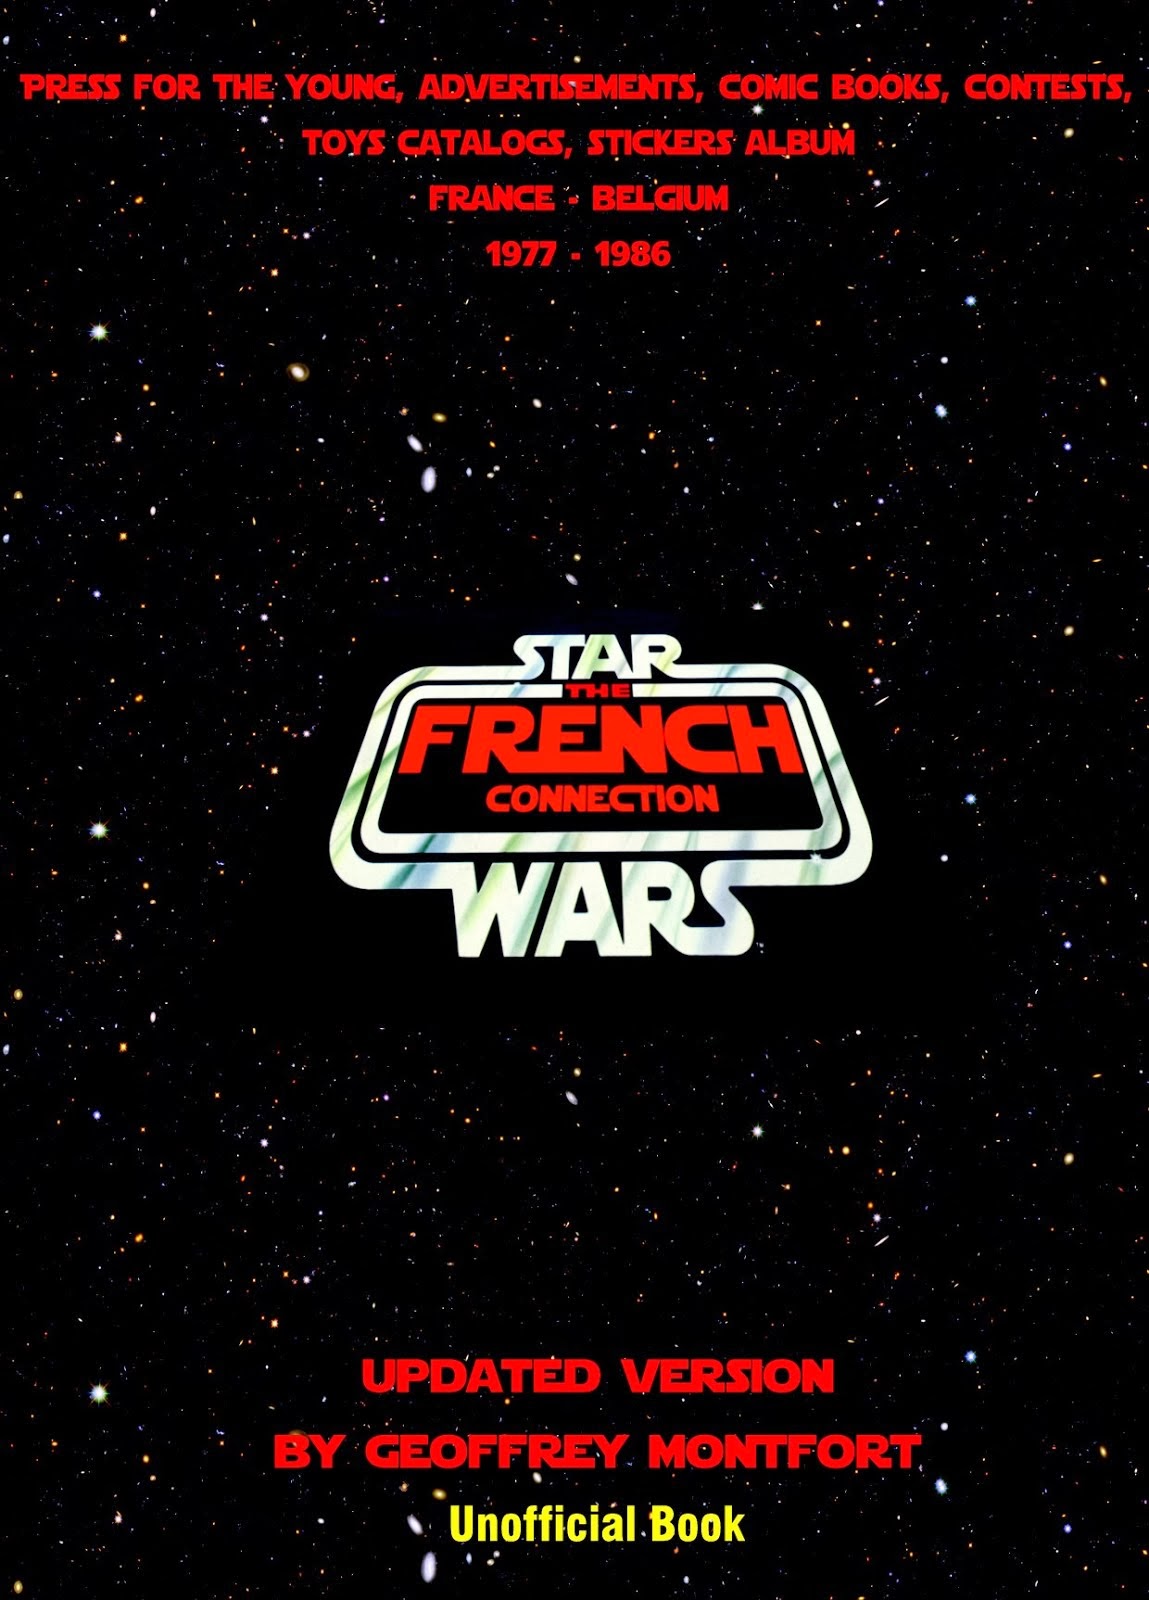 The Star Wars French Connection